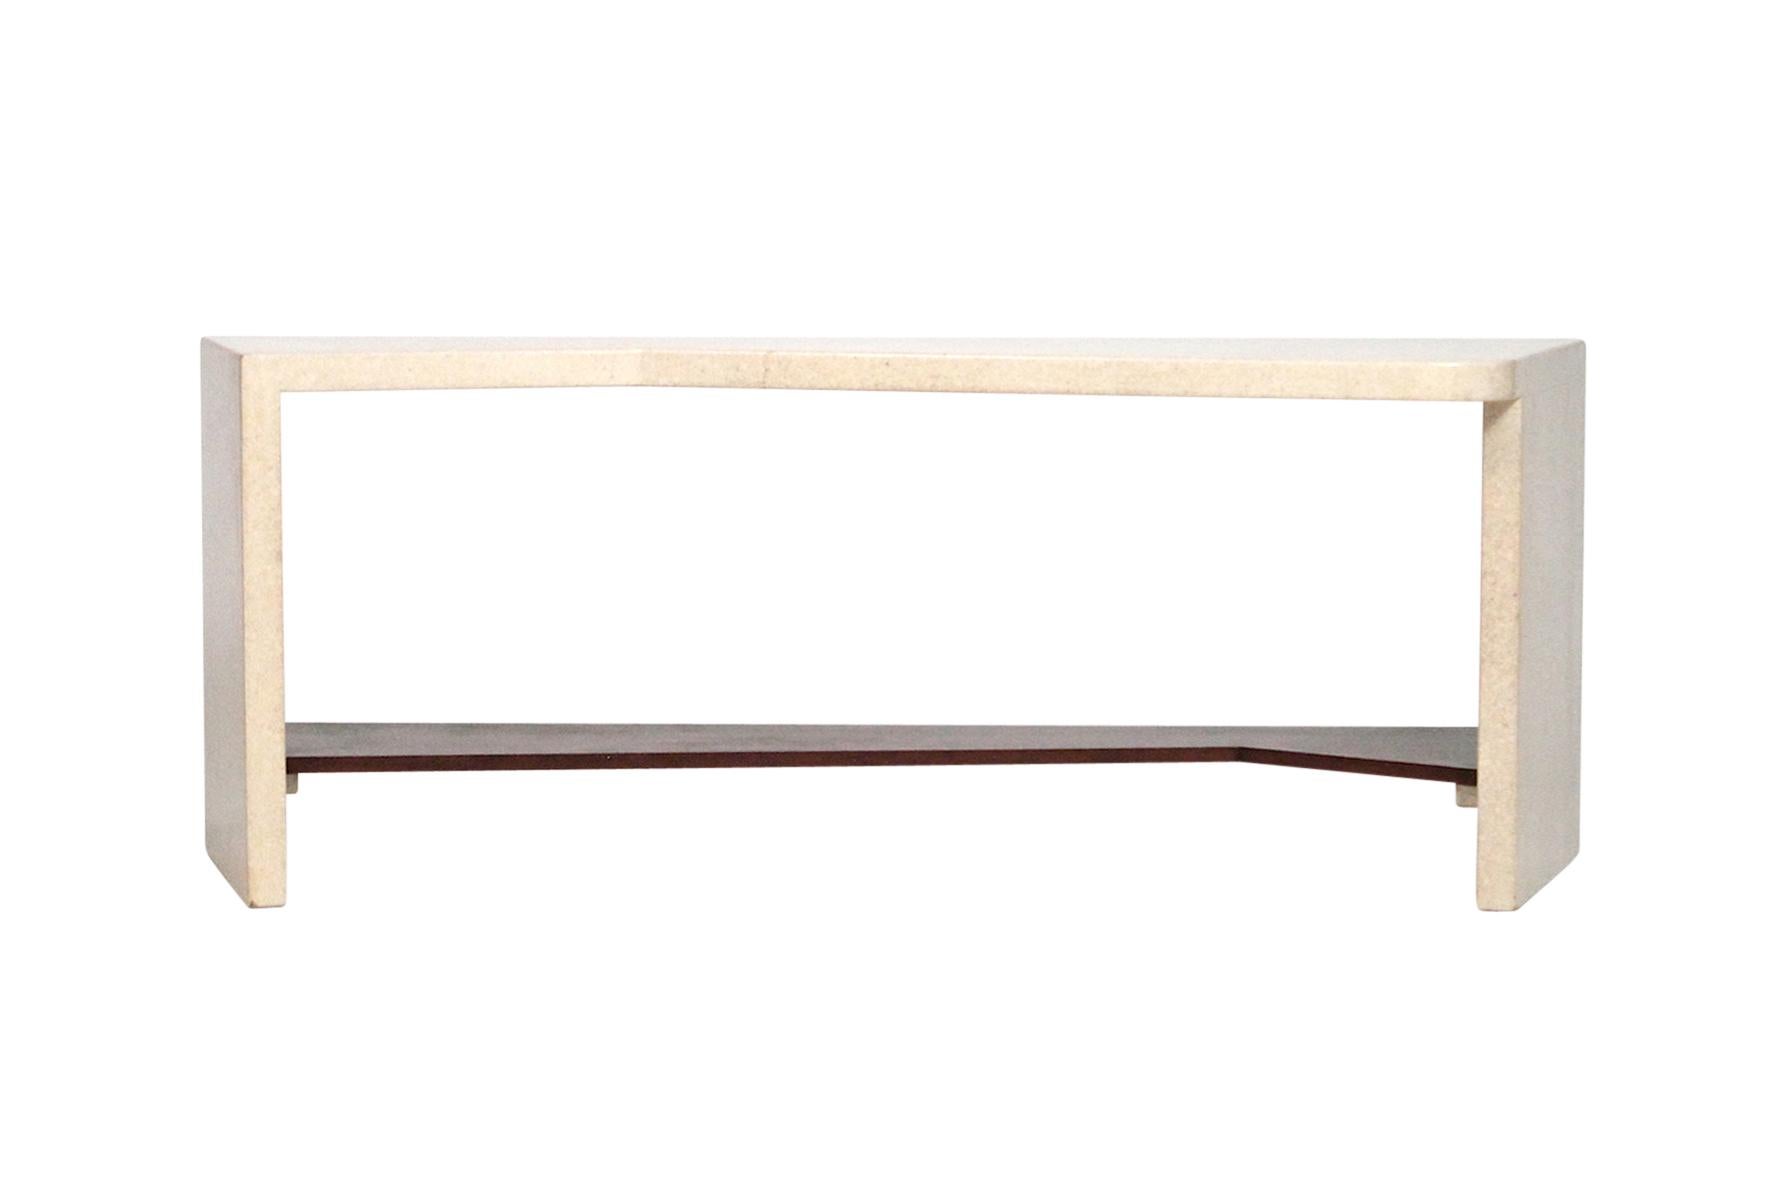 Rare asymmetrical cork and mahogany console table by Paul Frankl for Johnson Furniture.